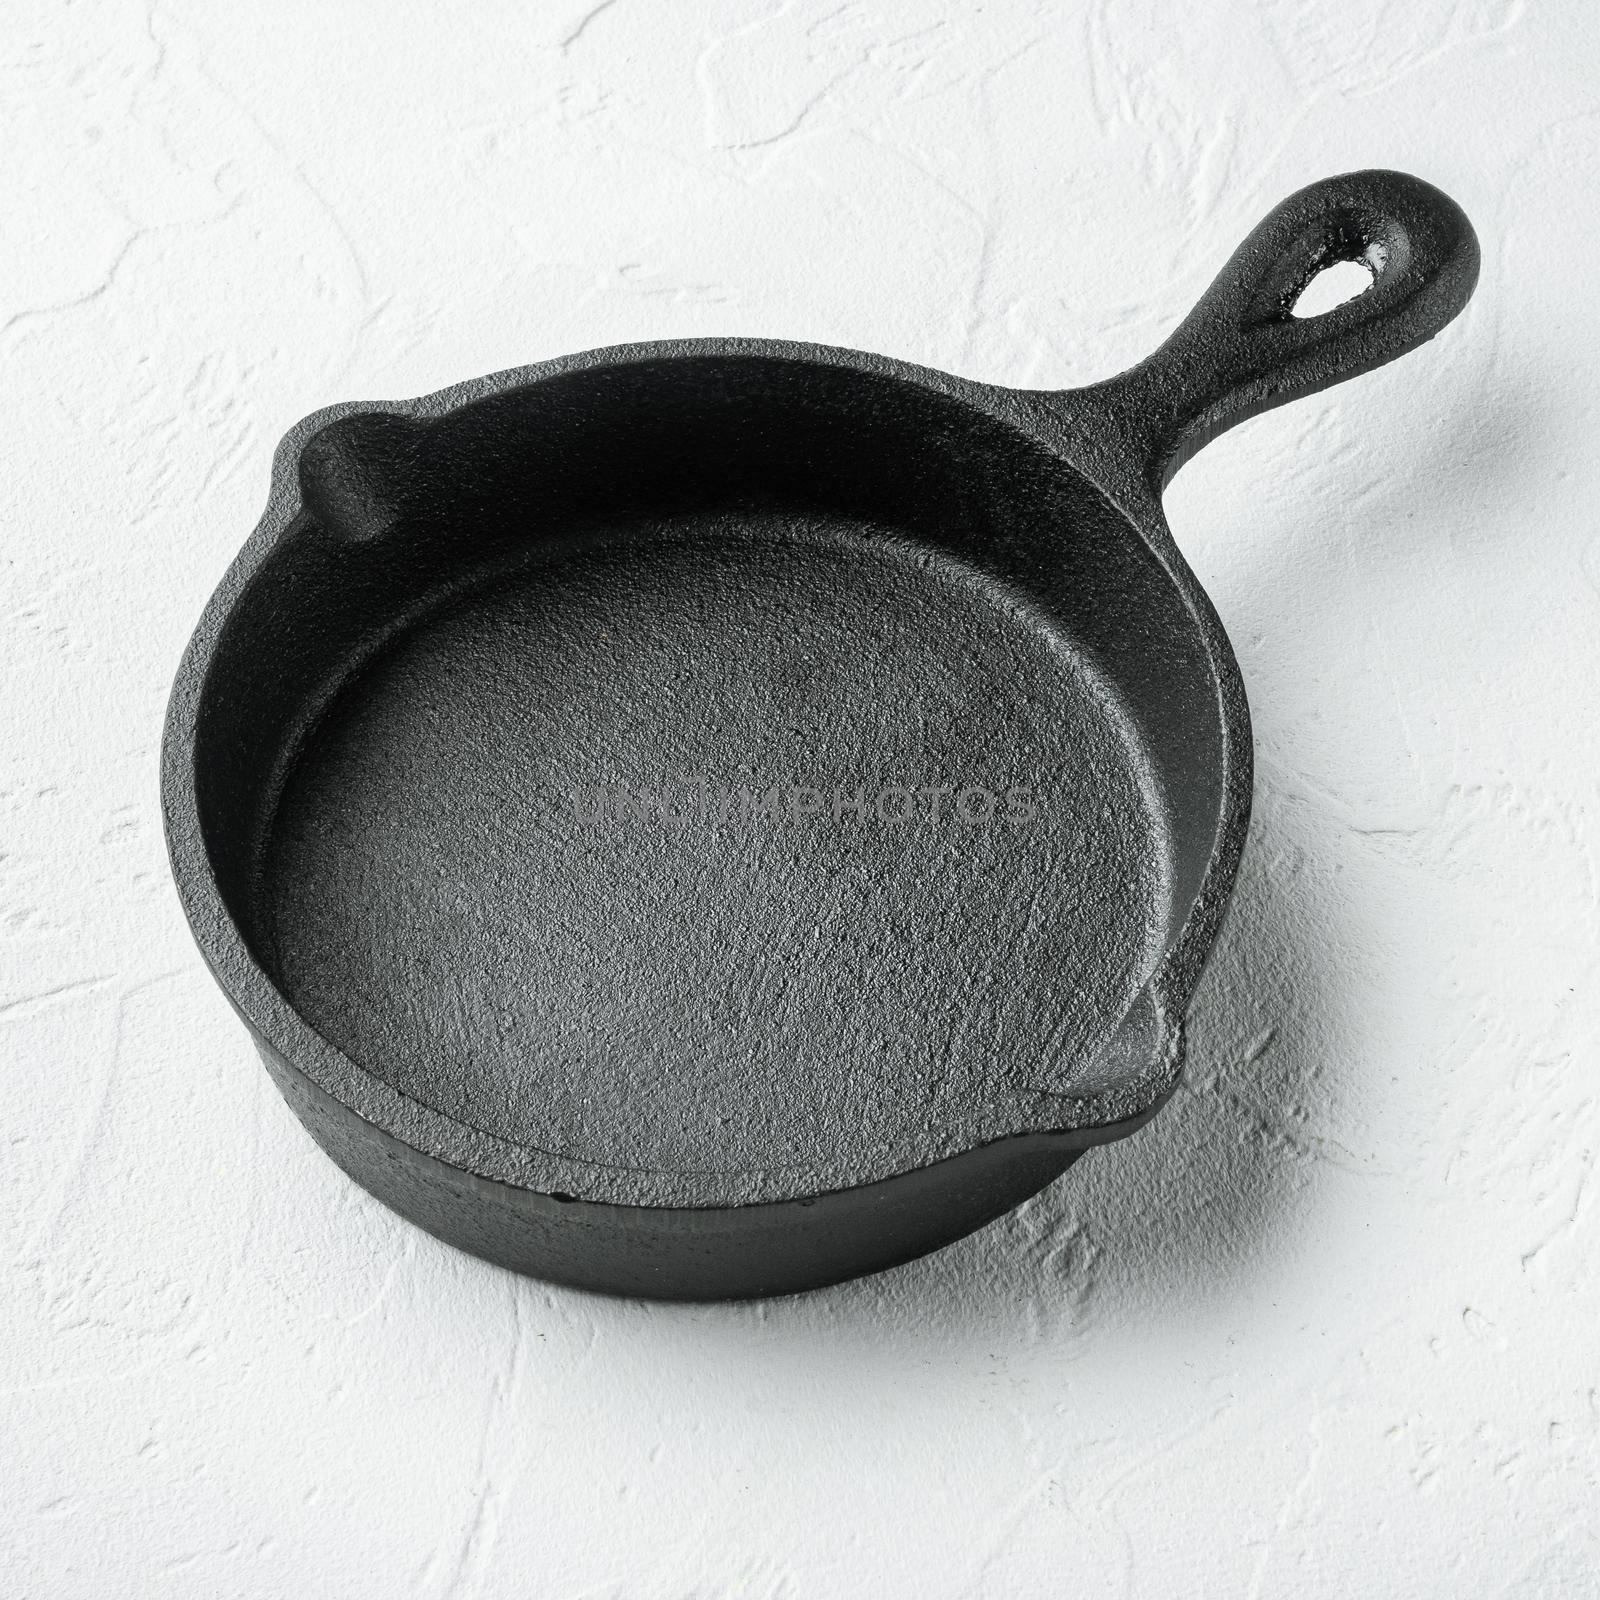 Kitchenware frying, cast iron pan, on white stone surface, square format